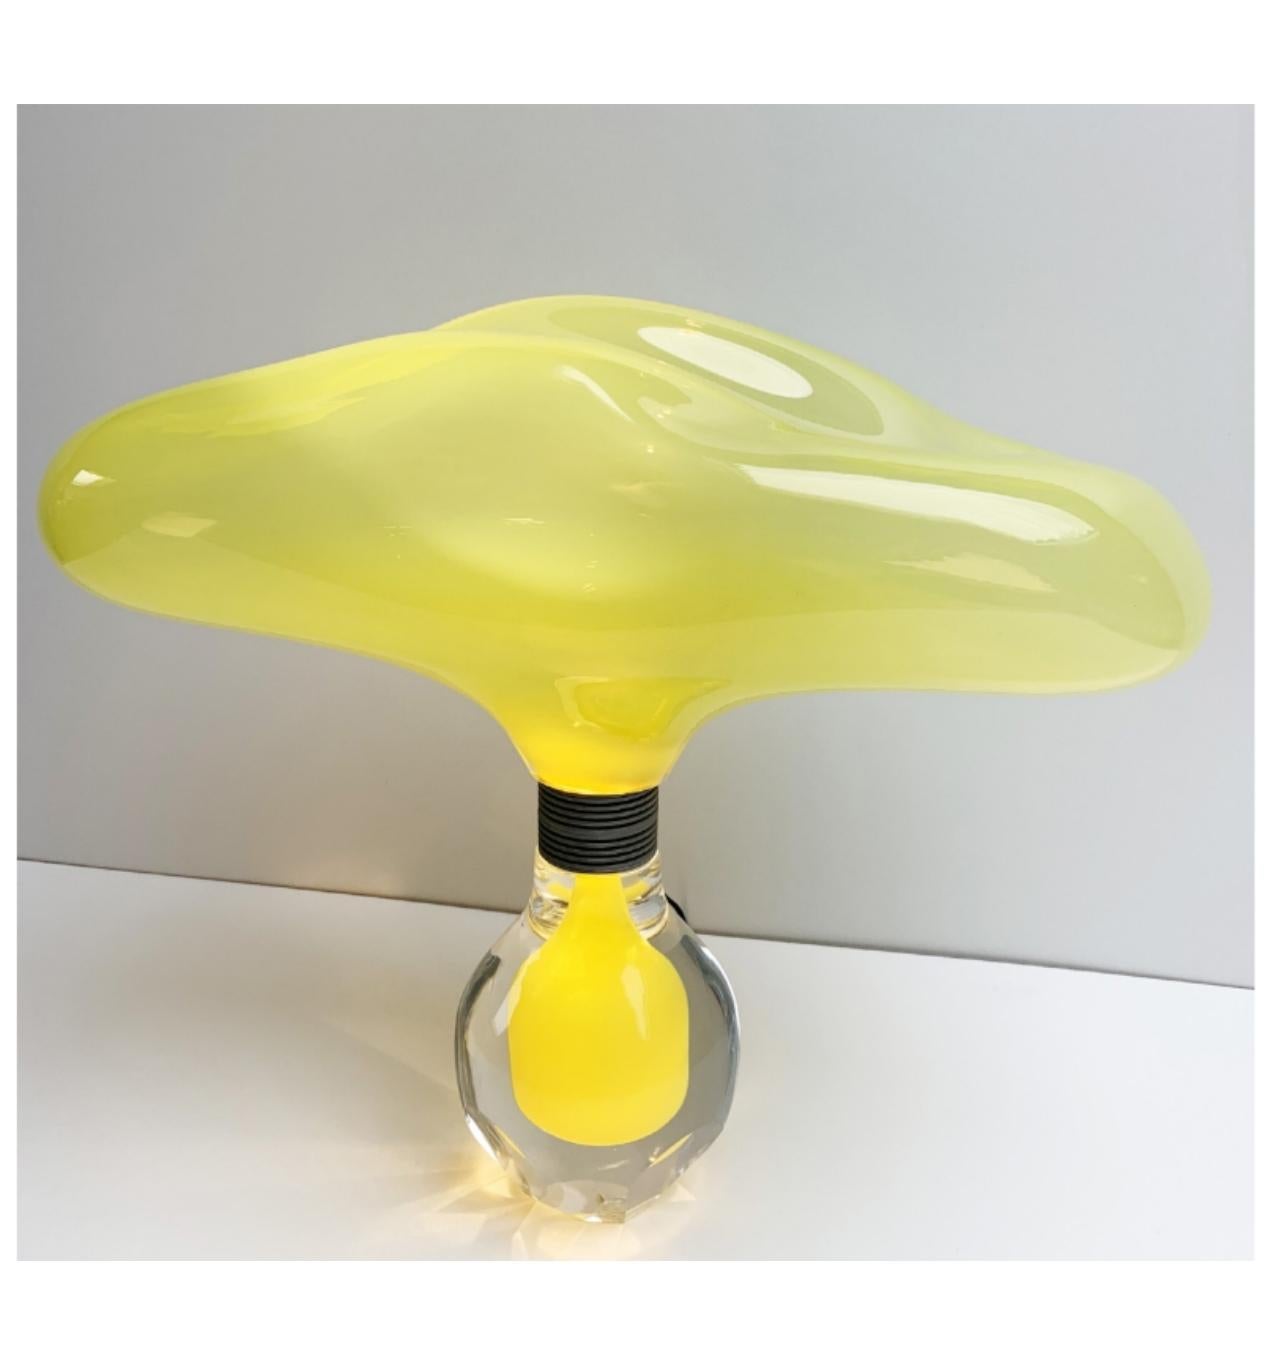 Yellow Love Potion by Mark Sturkenboom
Size: 35 x 40 x 20 cm, aprox 4 kg
Material: mouth blown glass, Facetted and polished glass dimmable led lamp


Love potion is a series of mouth blown and handcrafted glass bottles that hold an elixir based on